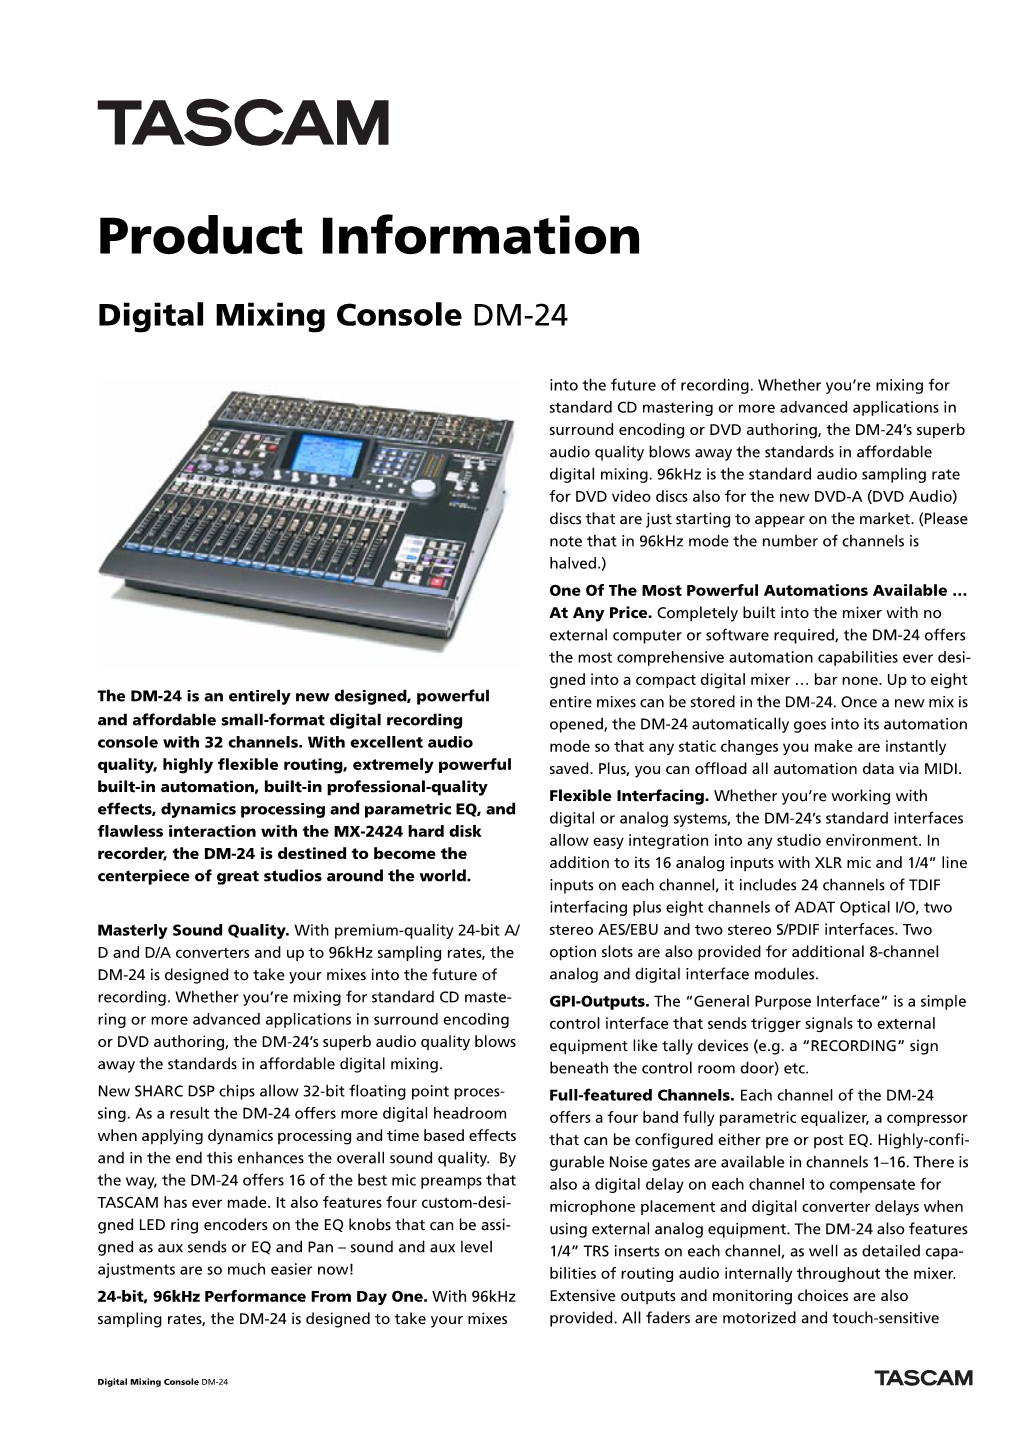 Tascam Product Information